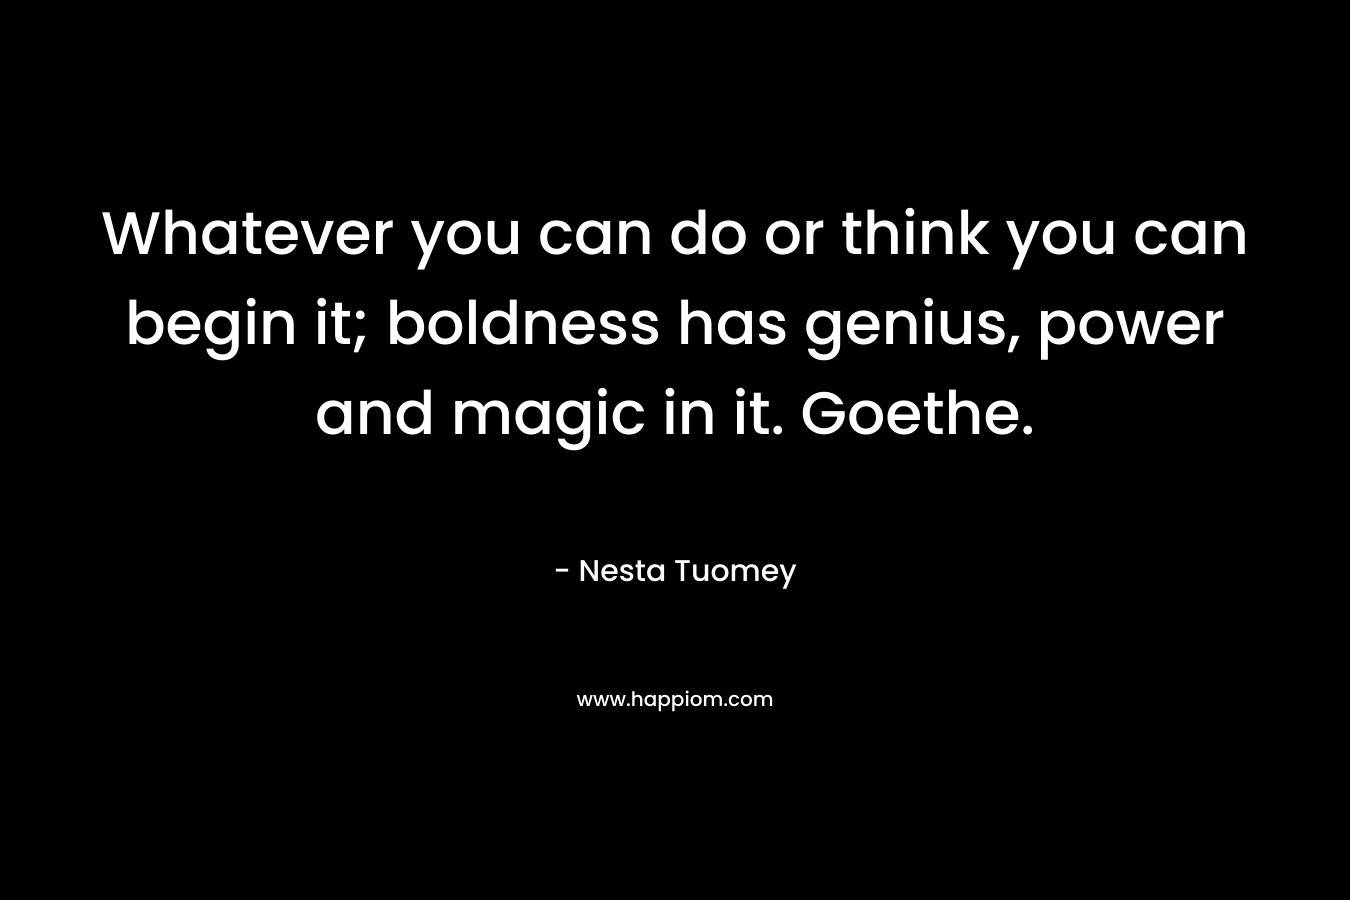 Whatever you can do or think you can begin it; boldness has genius, power and magic in it. Goethe. – Nesta Tuomey